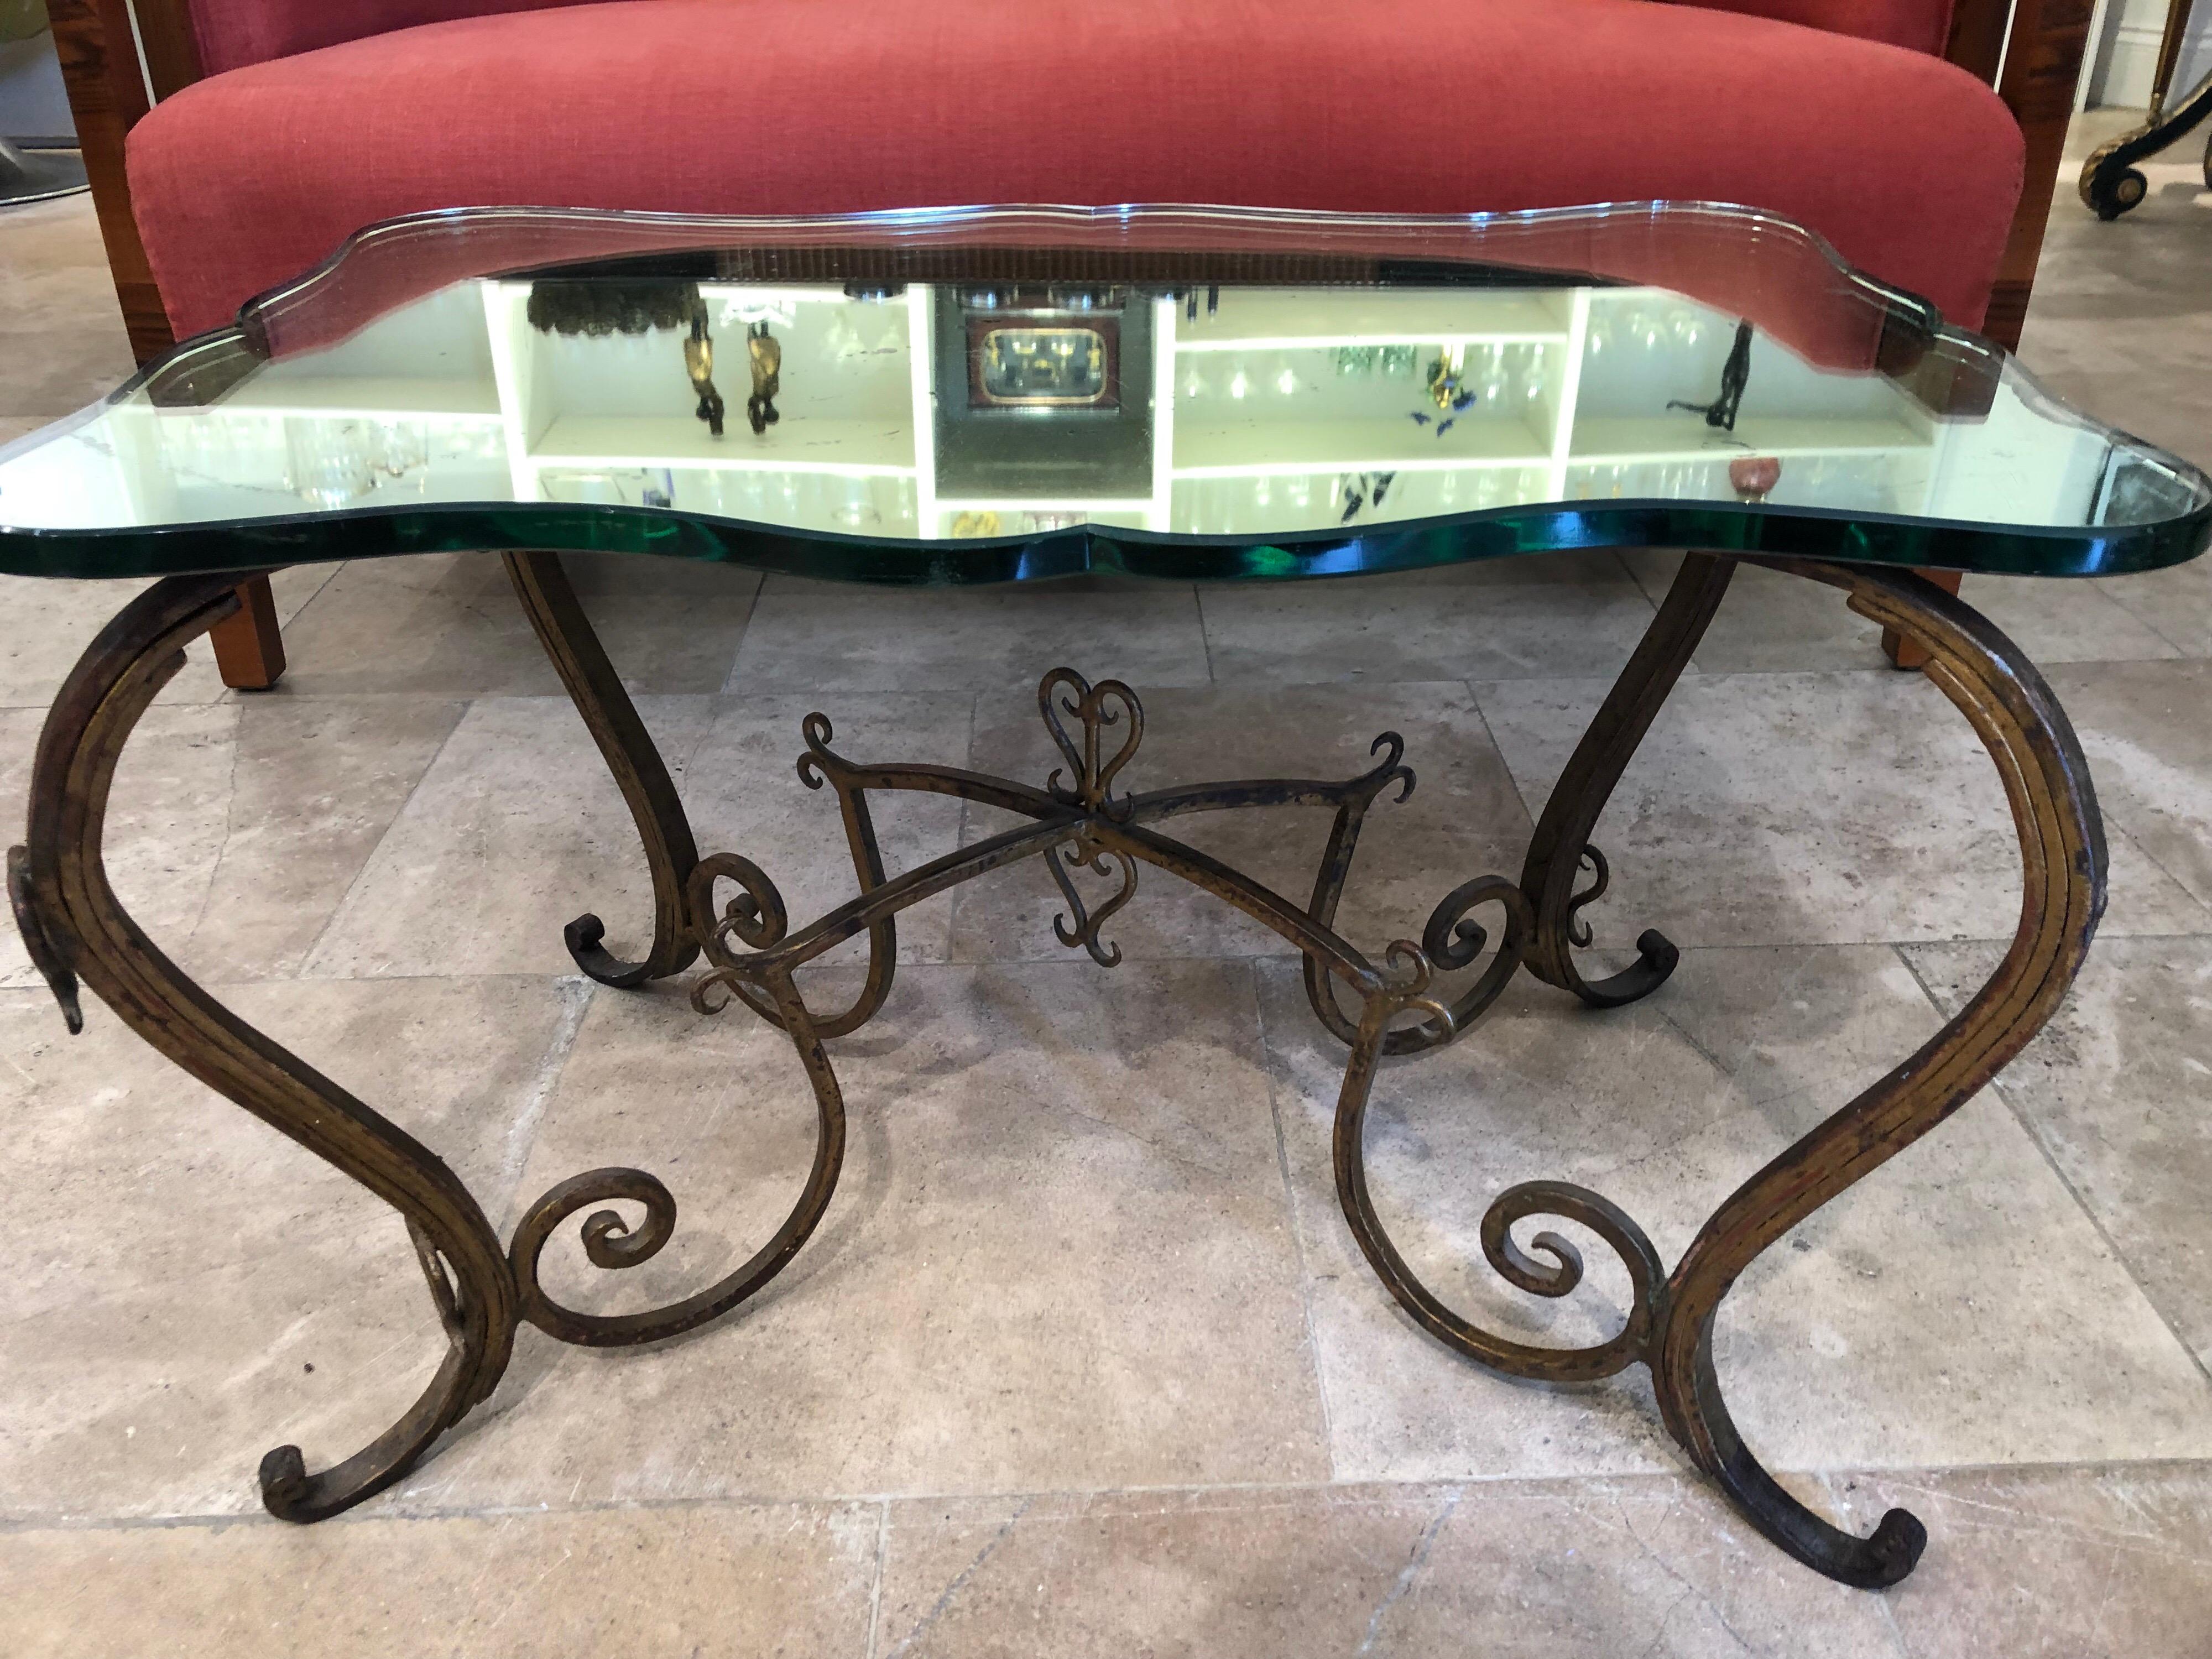 20th Century Rene Drouet Hand Forged Guilded Metal Table with Original Mirrored Glass Top For Sale